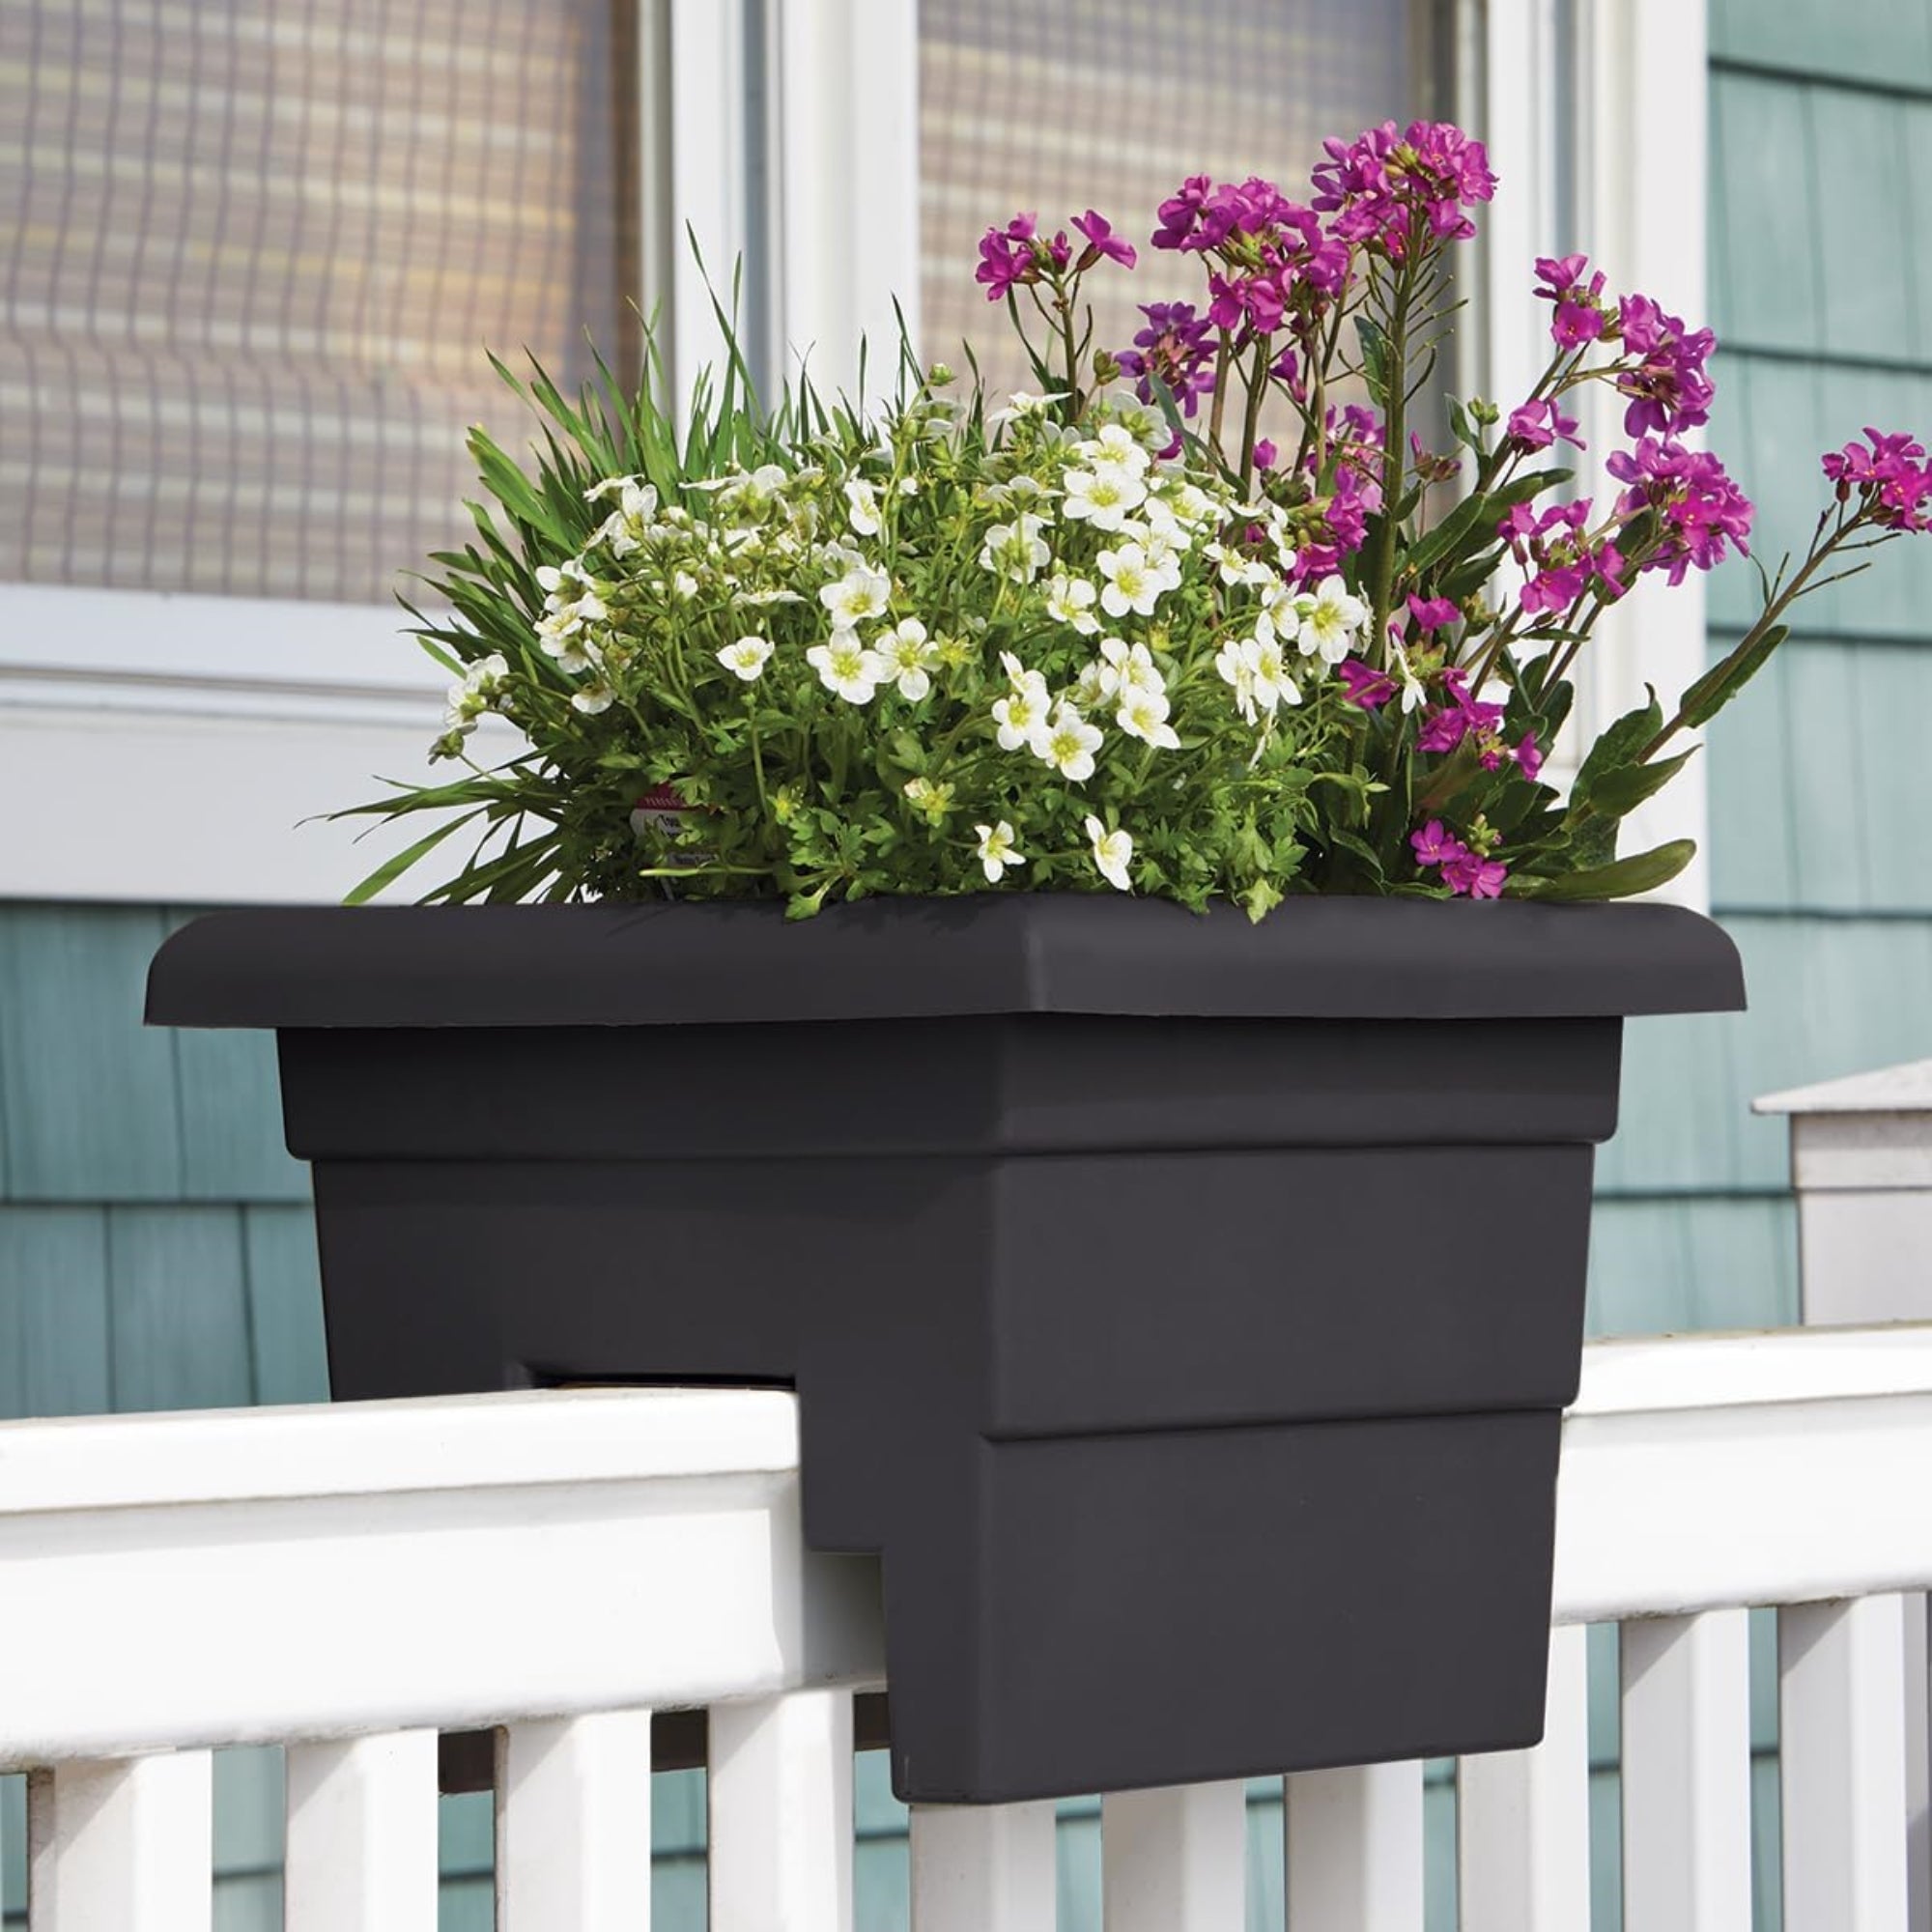 Novelty Countryside Weather Resistant Rail Planter, Black, 16"